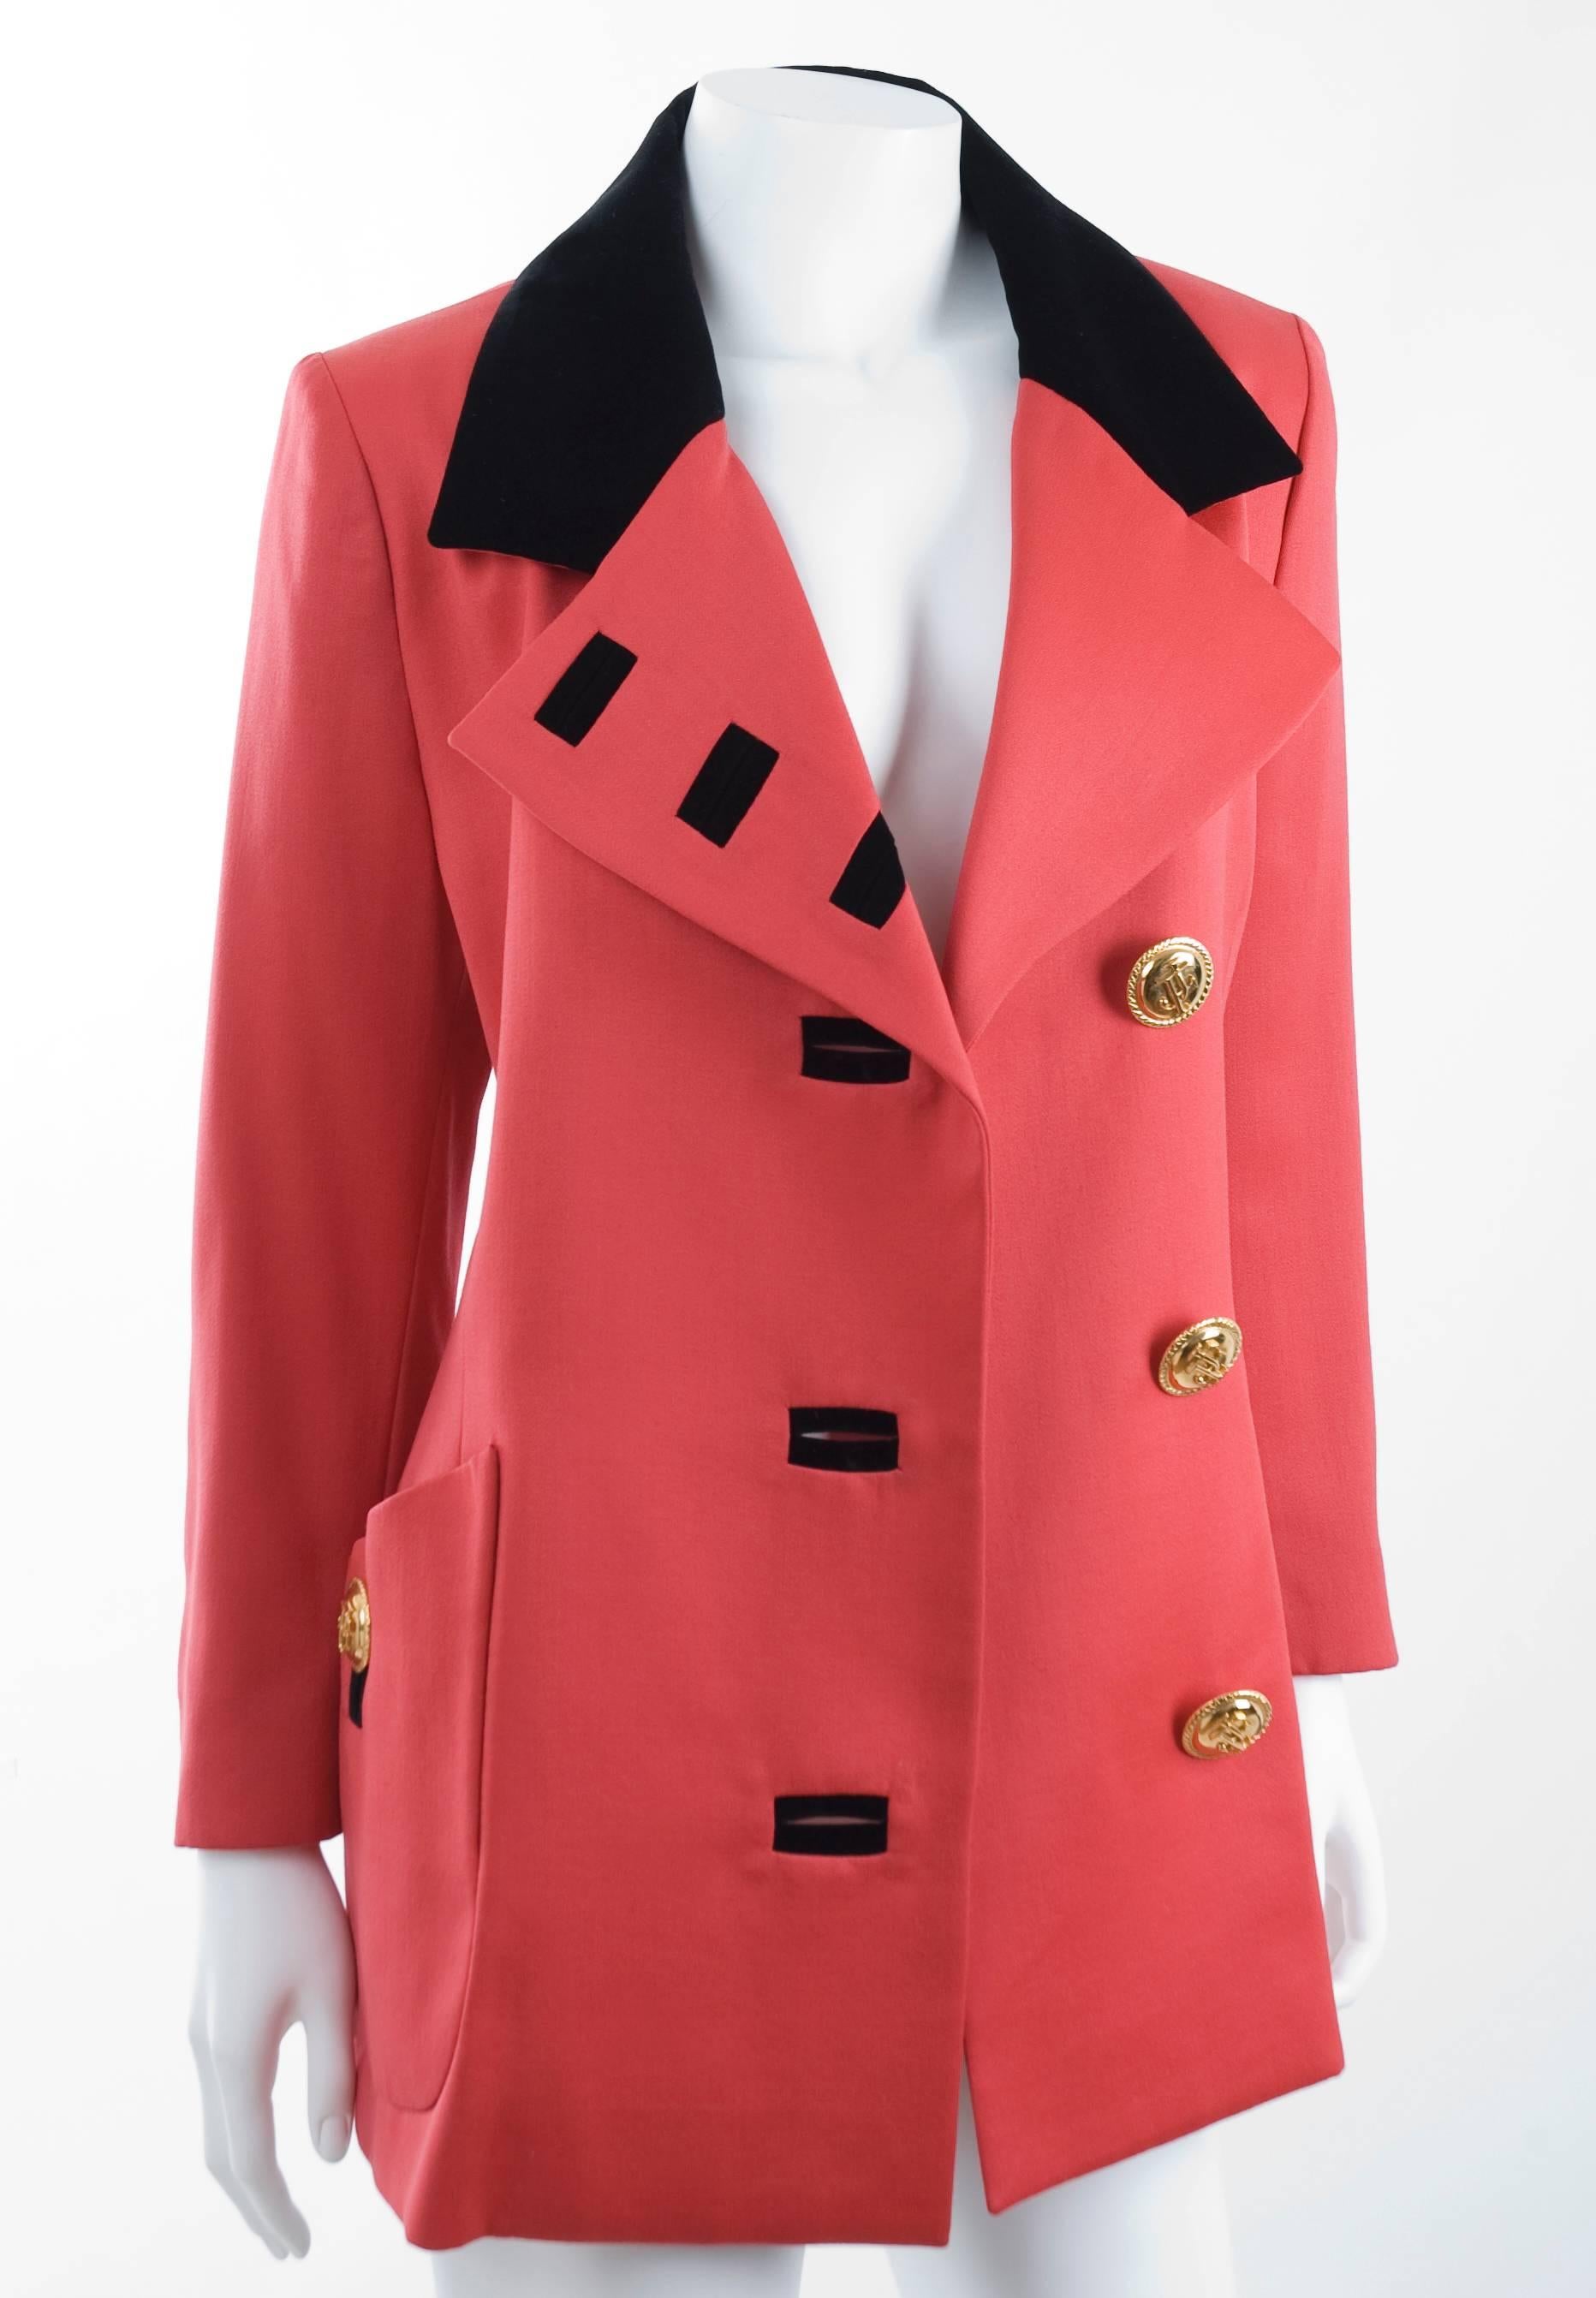 Jaques Fath Jacket in Lipstick Red and Black Velvet For Sale 2